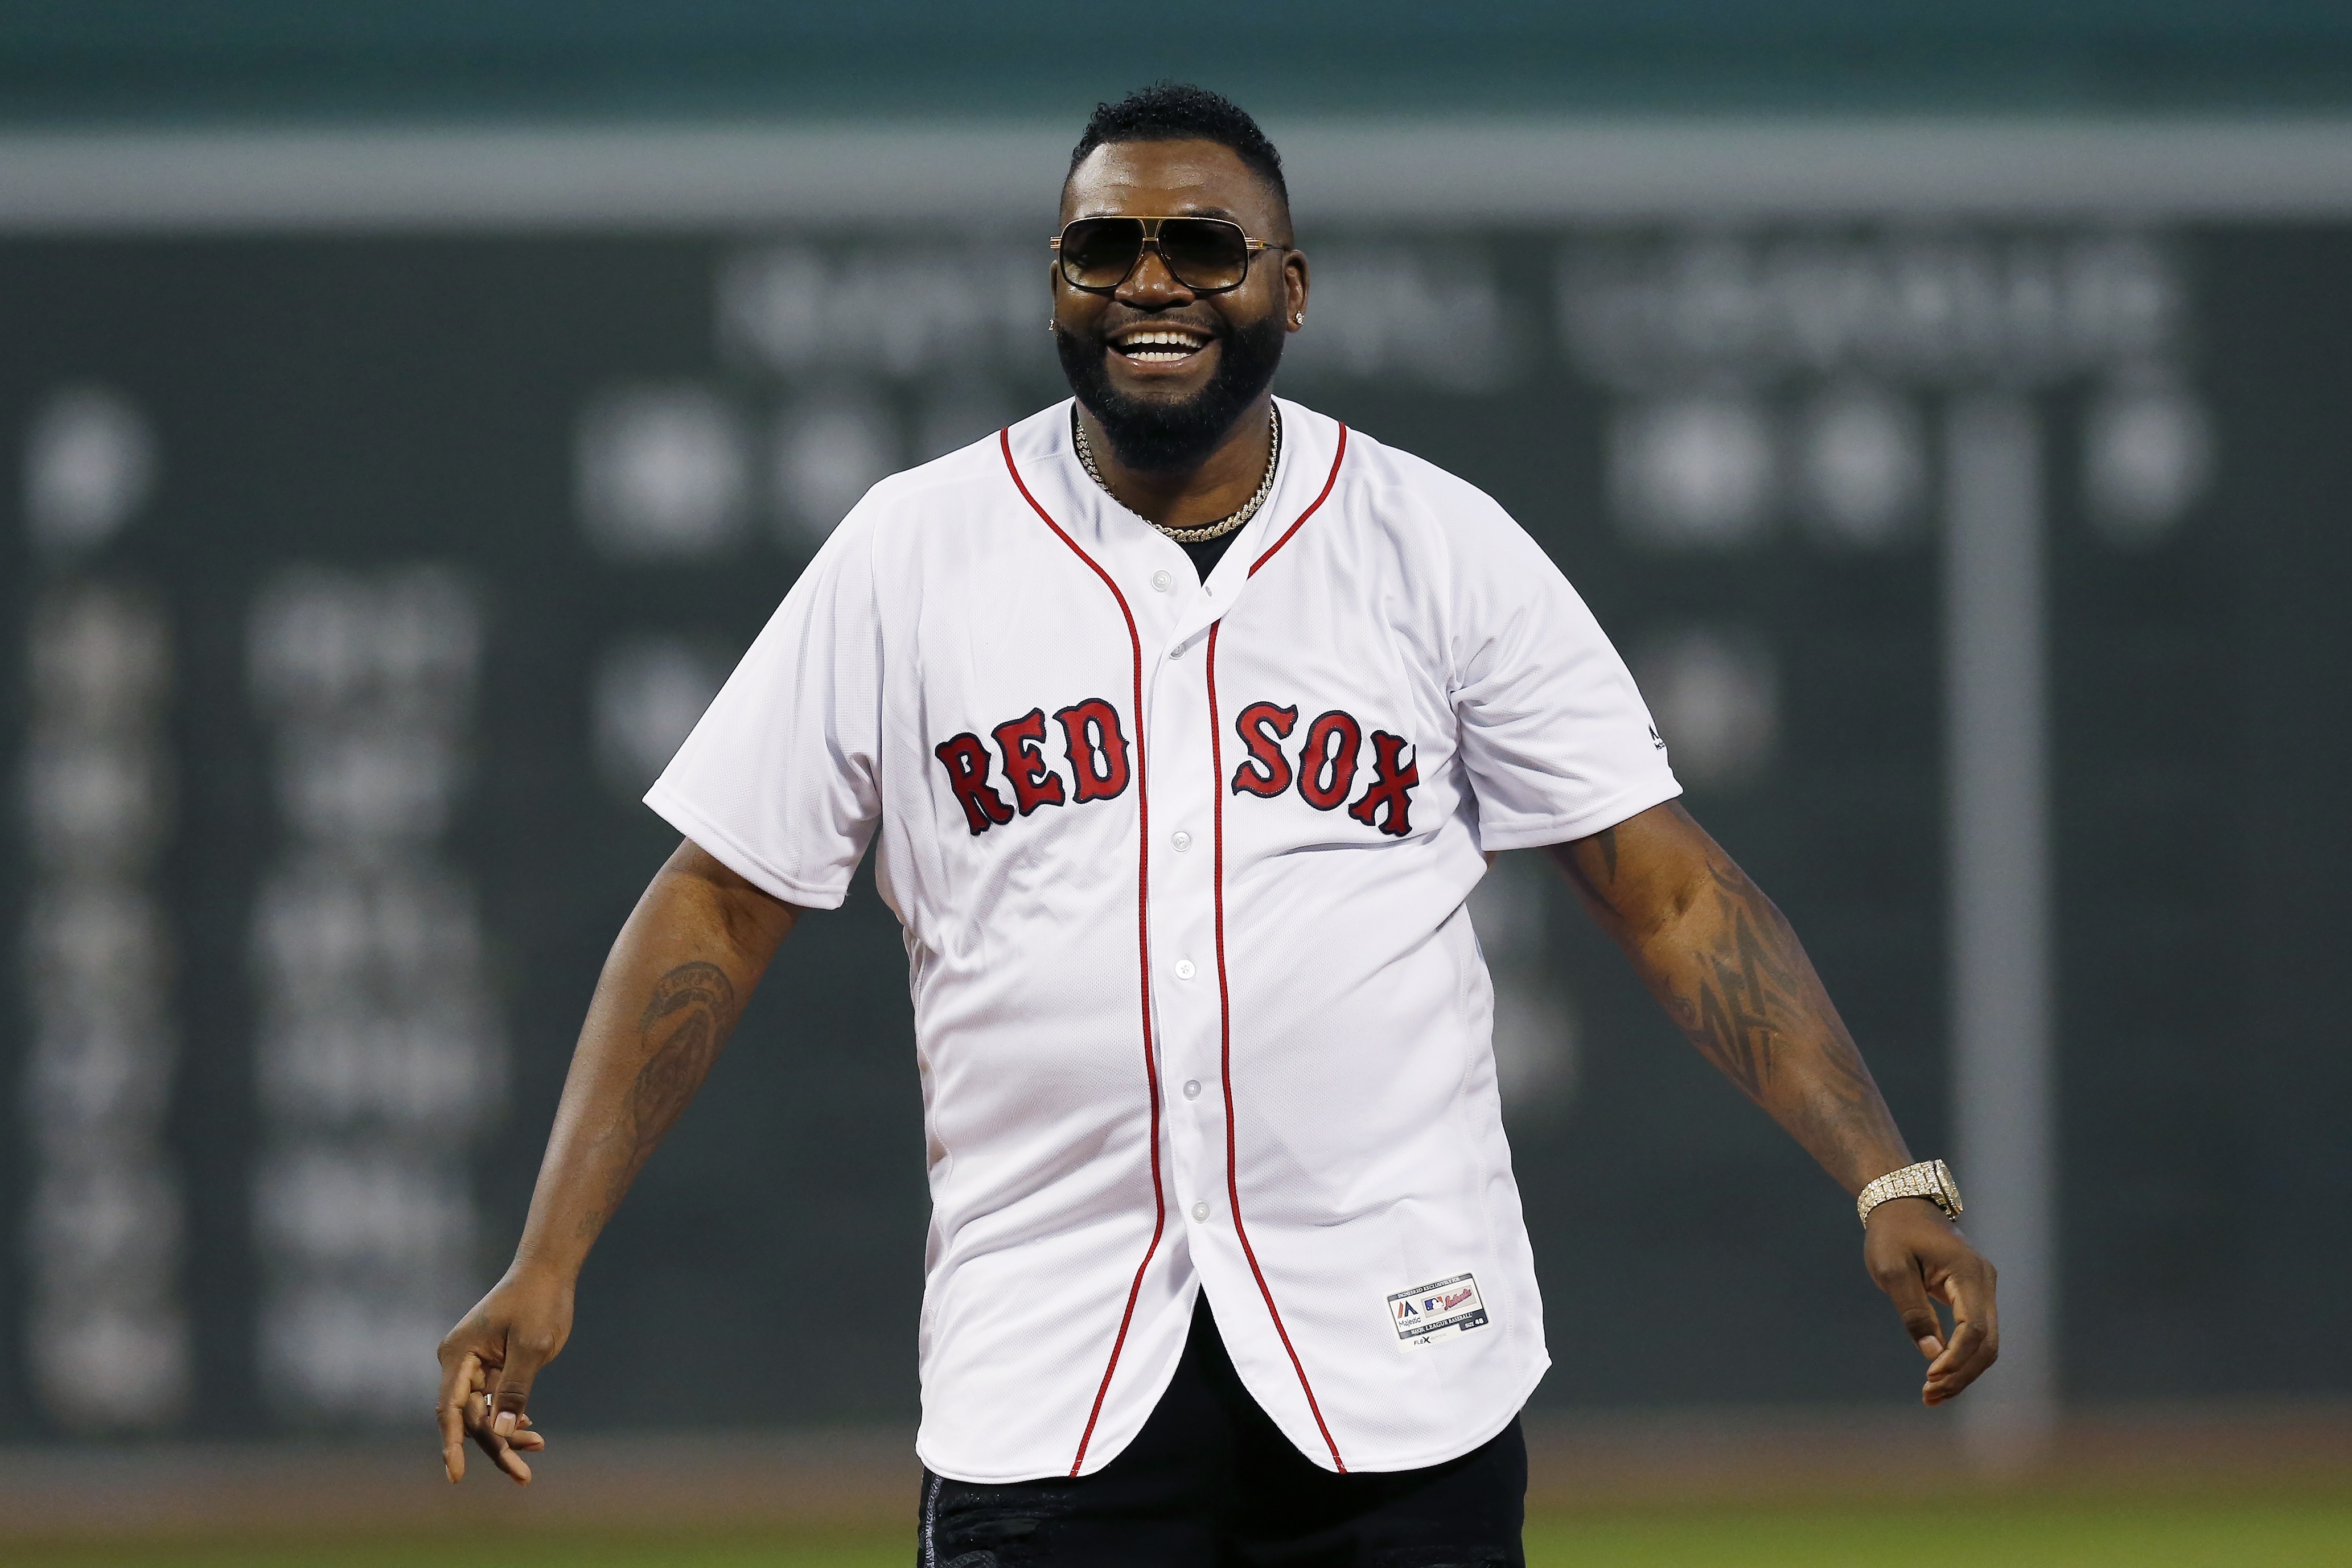 David Ortiz voted into Baseball Hall of Fame in first year on ballot